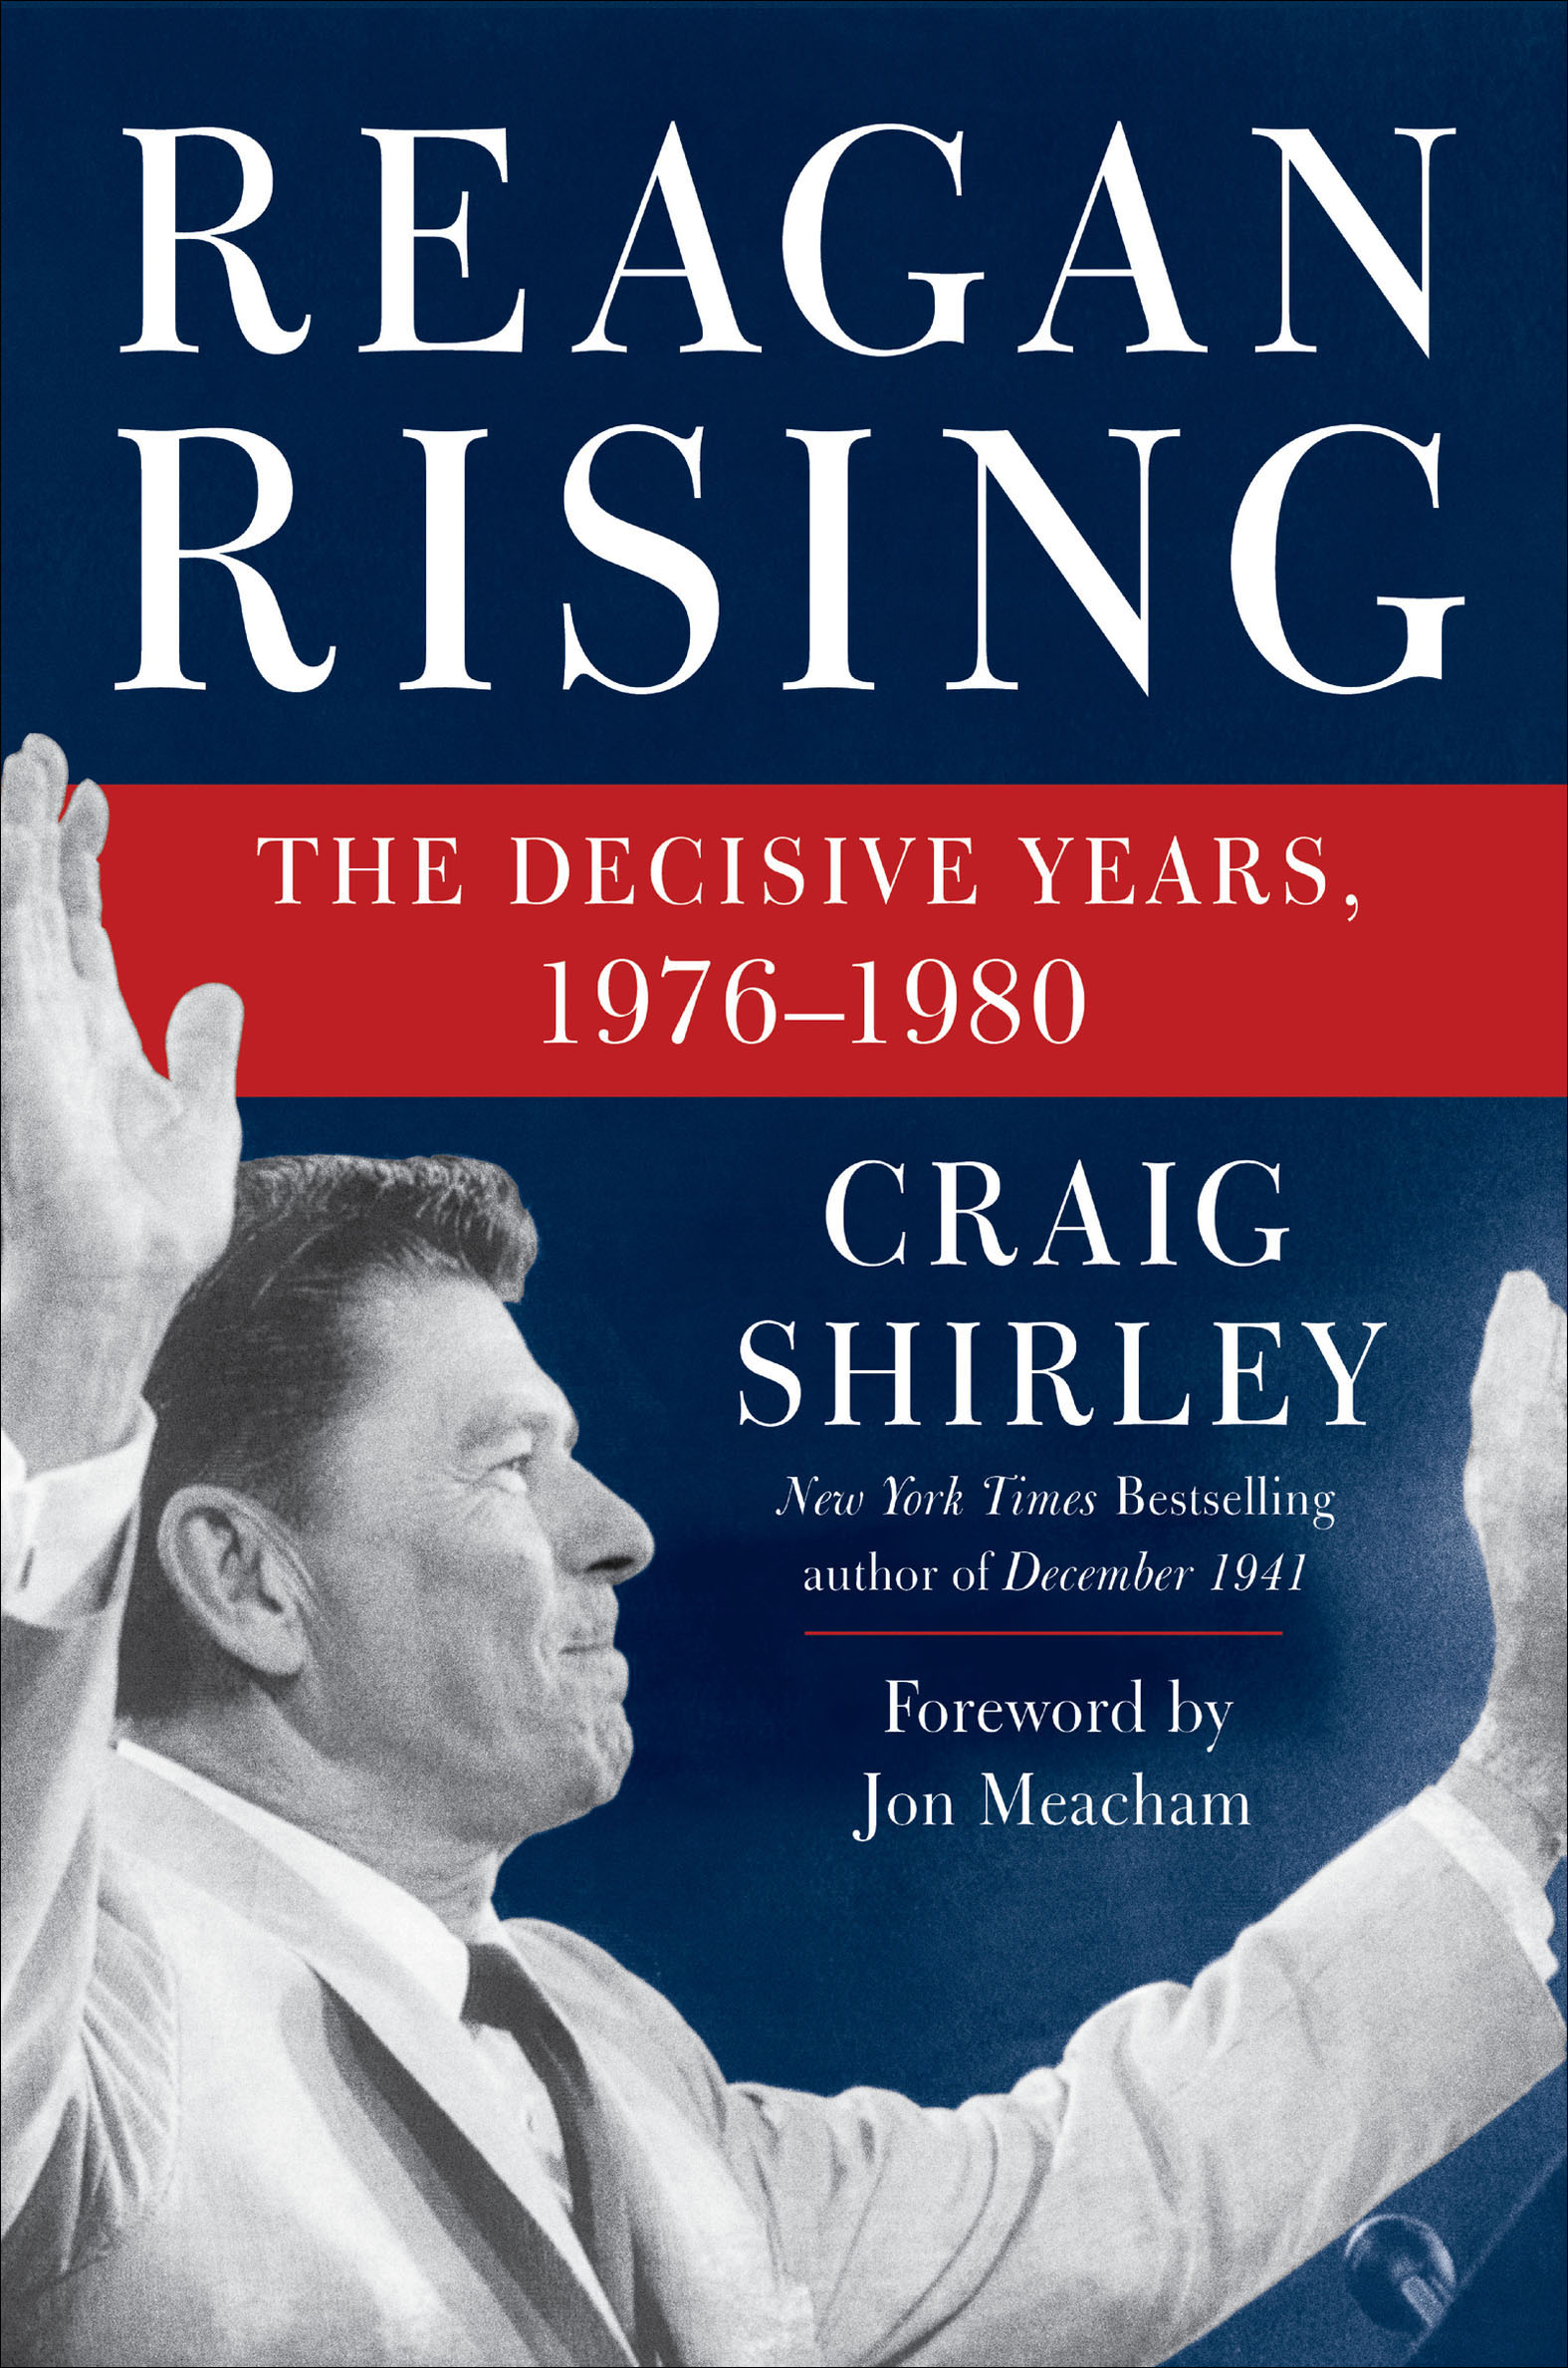 Reagan rising the decisive years, 1976-1980 cover image